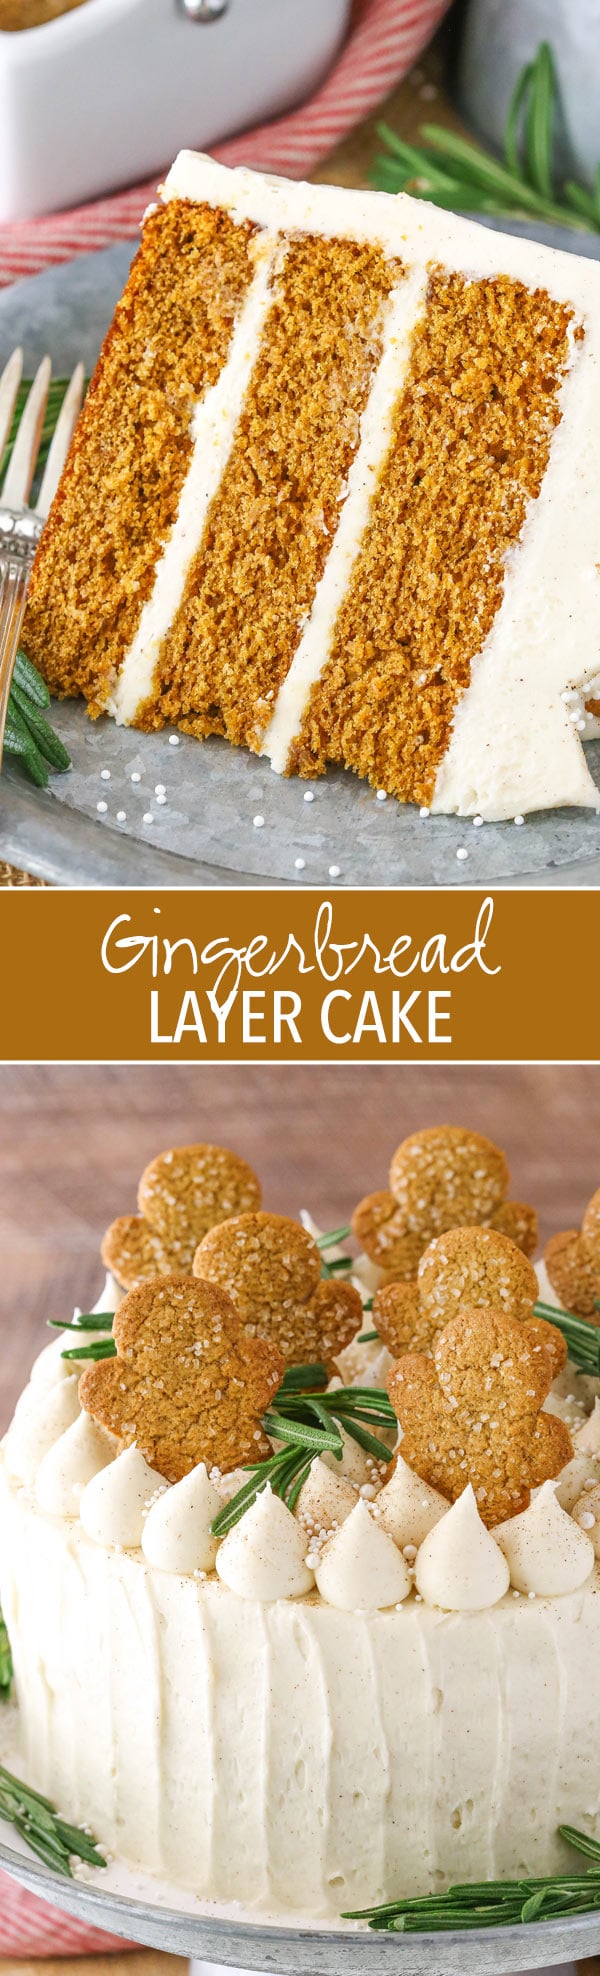 Gingerbread Layer Cake! Moist and delicious for the holidays!